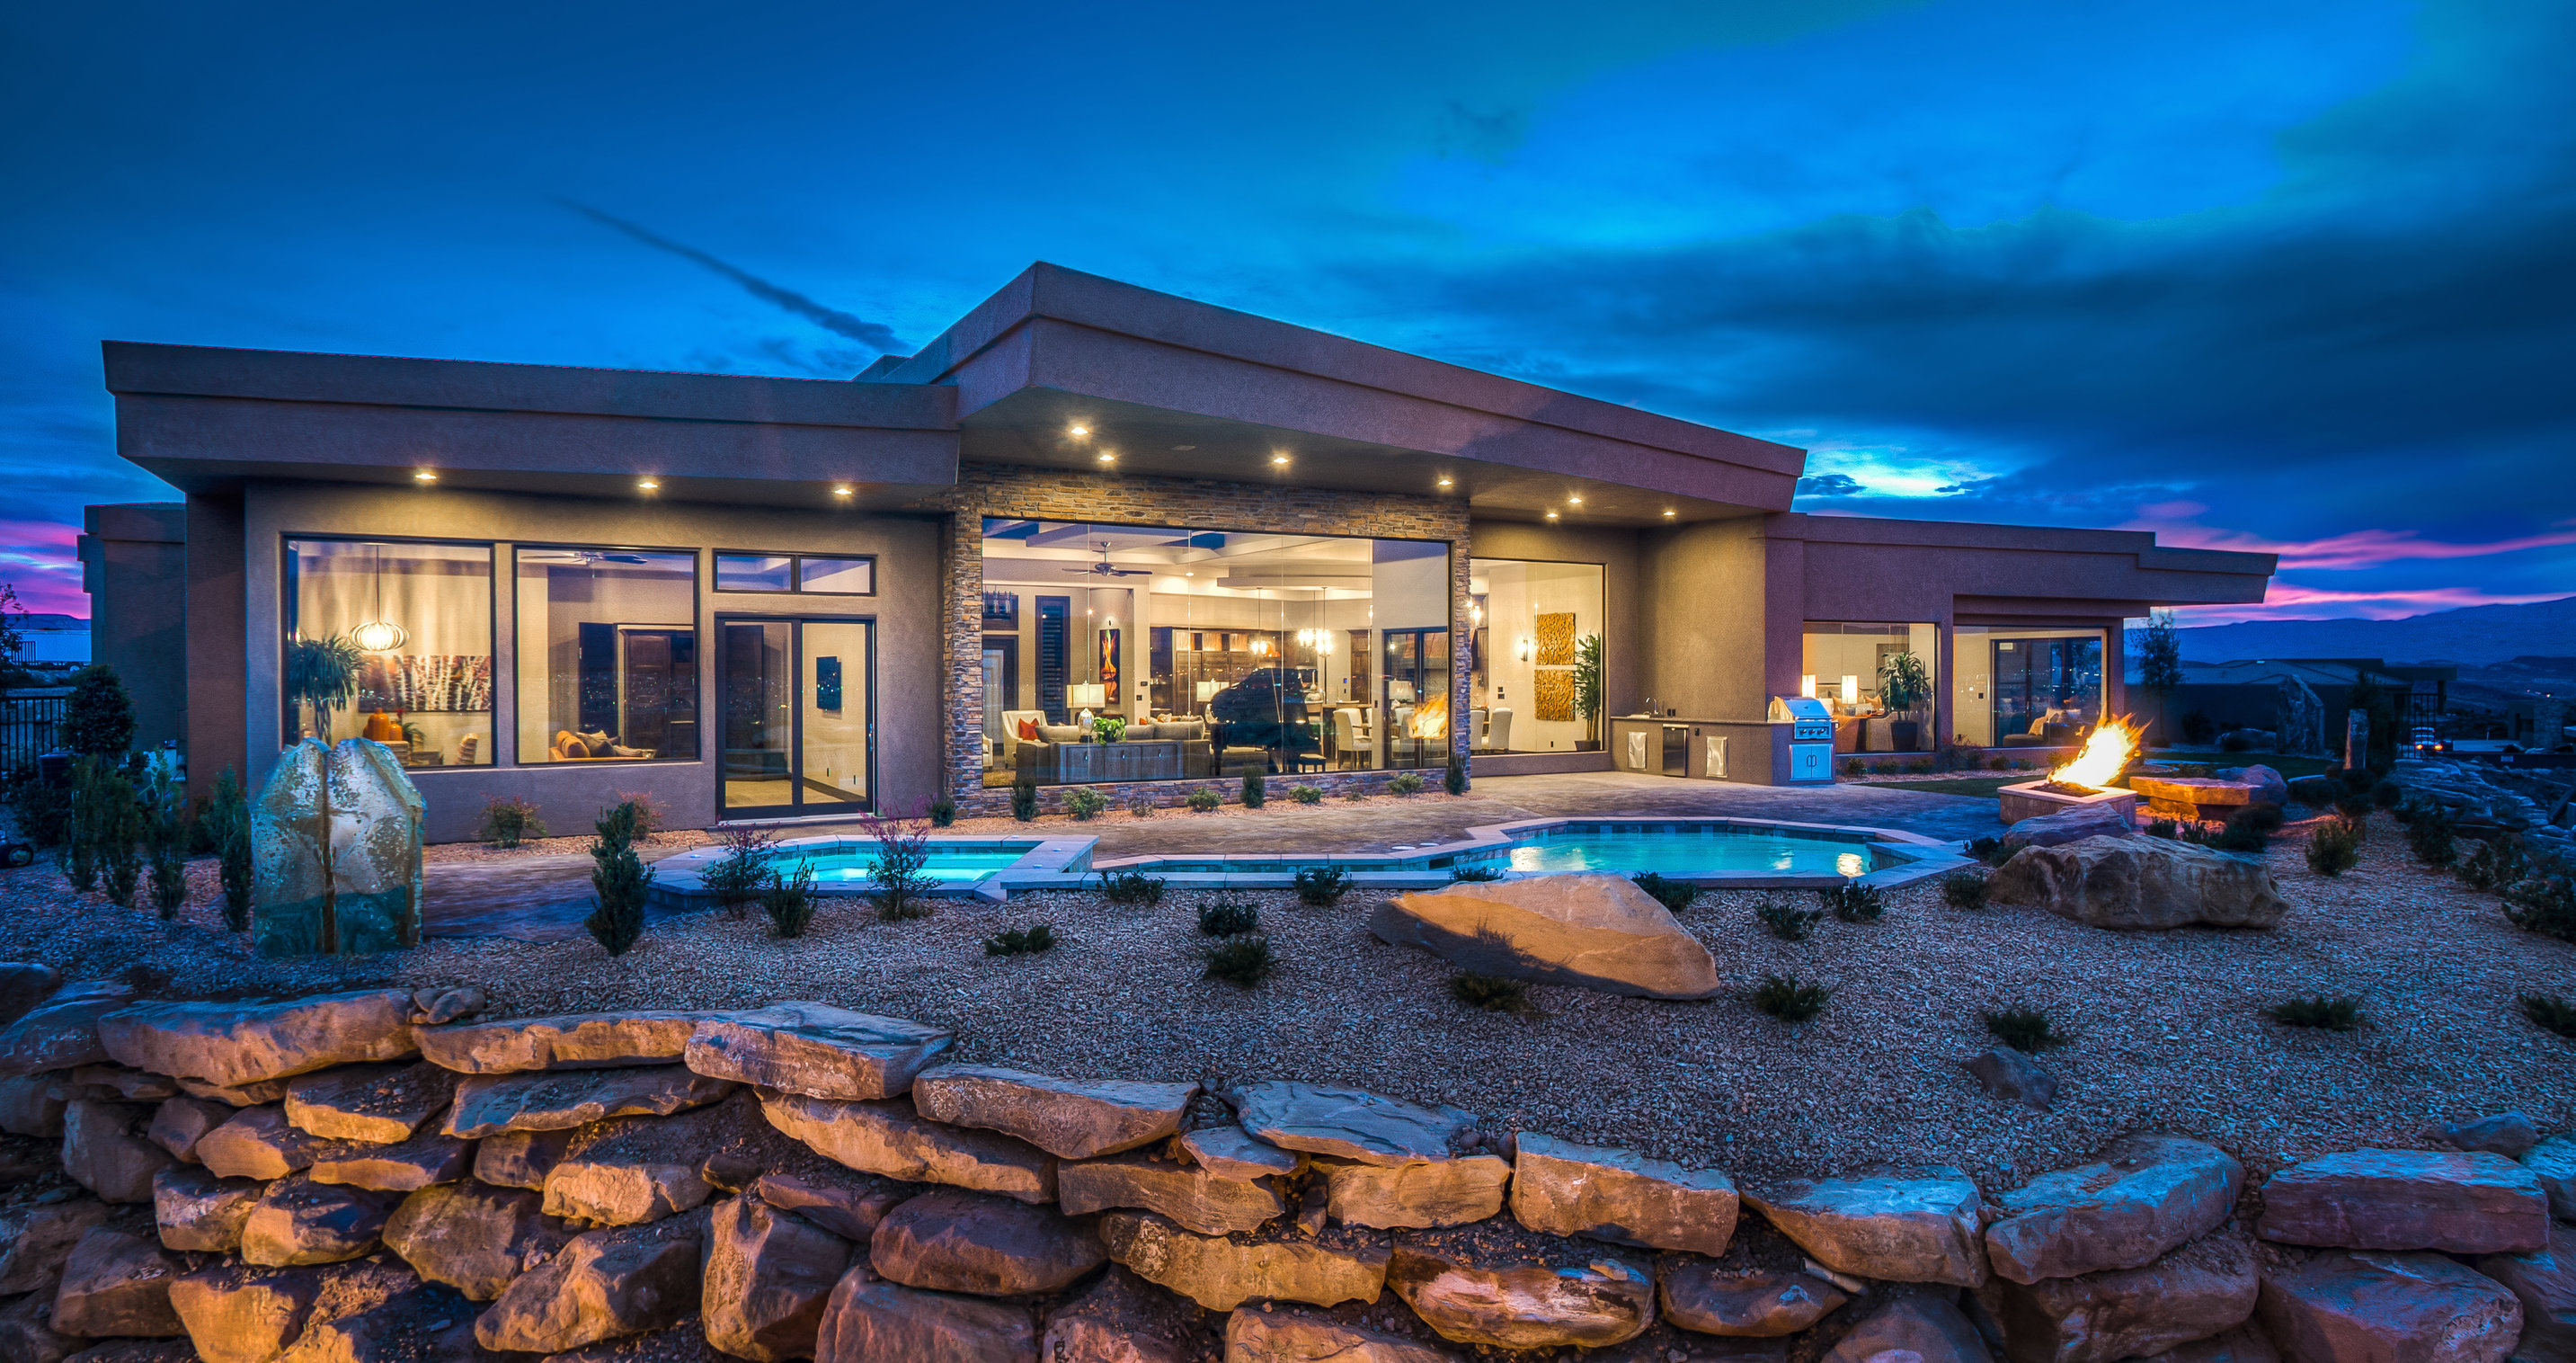 Luxury Home In St George Utah Full HD Wallpaper and Background Image  2866x1516  ID:550587